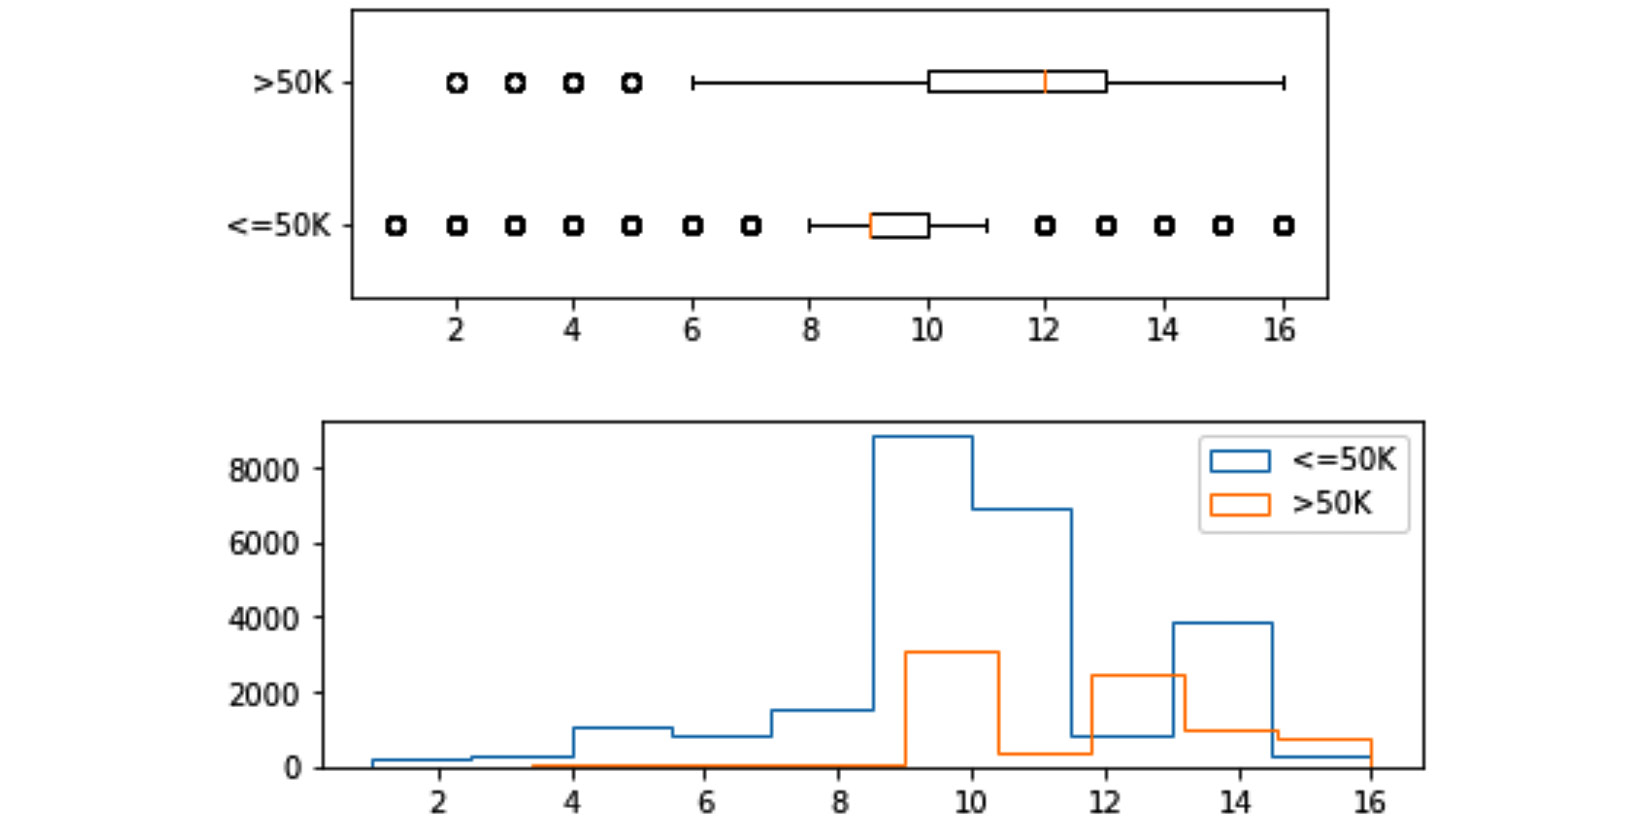 Figure 5.5 – Histograms and boxplots of education-num for two populations of income <=50K and >50K
